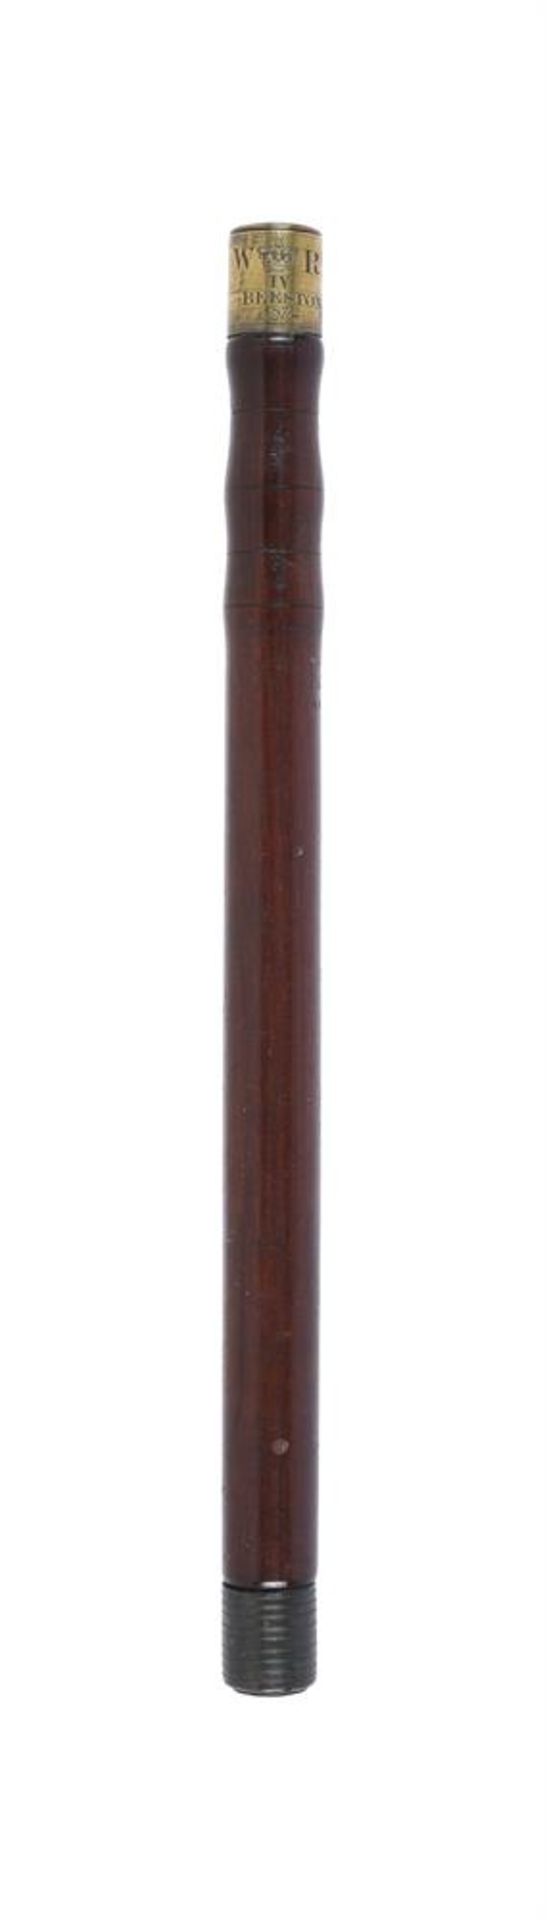 A WILLIAM IV MAHOGANY AND DATED BRASS MOUNTED TRUNCHEON